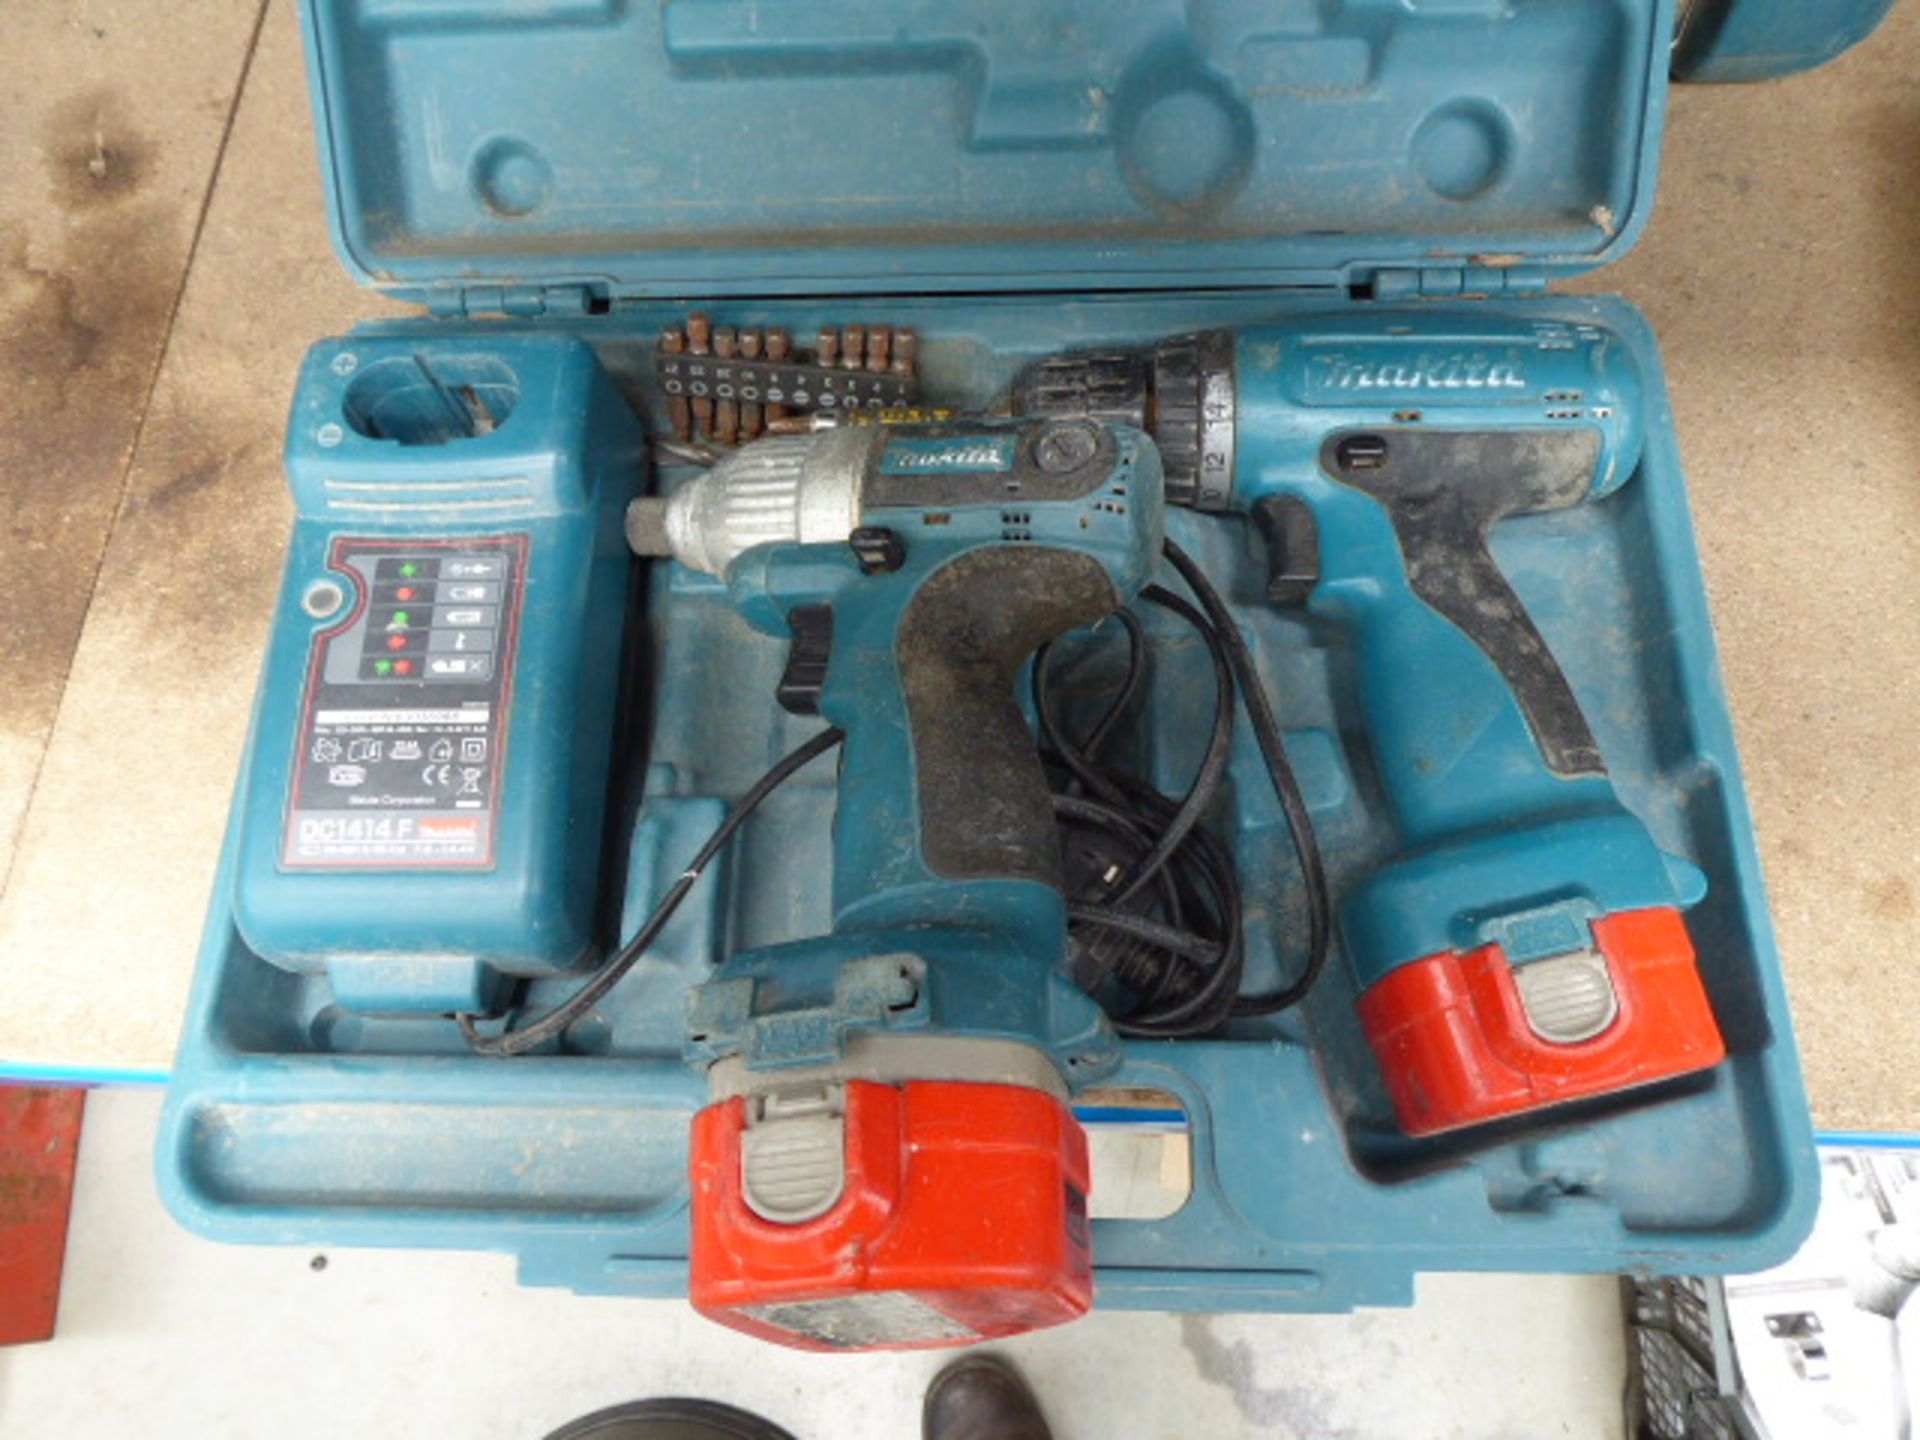 Makita drill and impact drive set with 2 batteries and charger